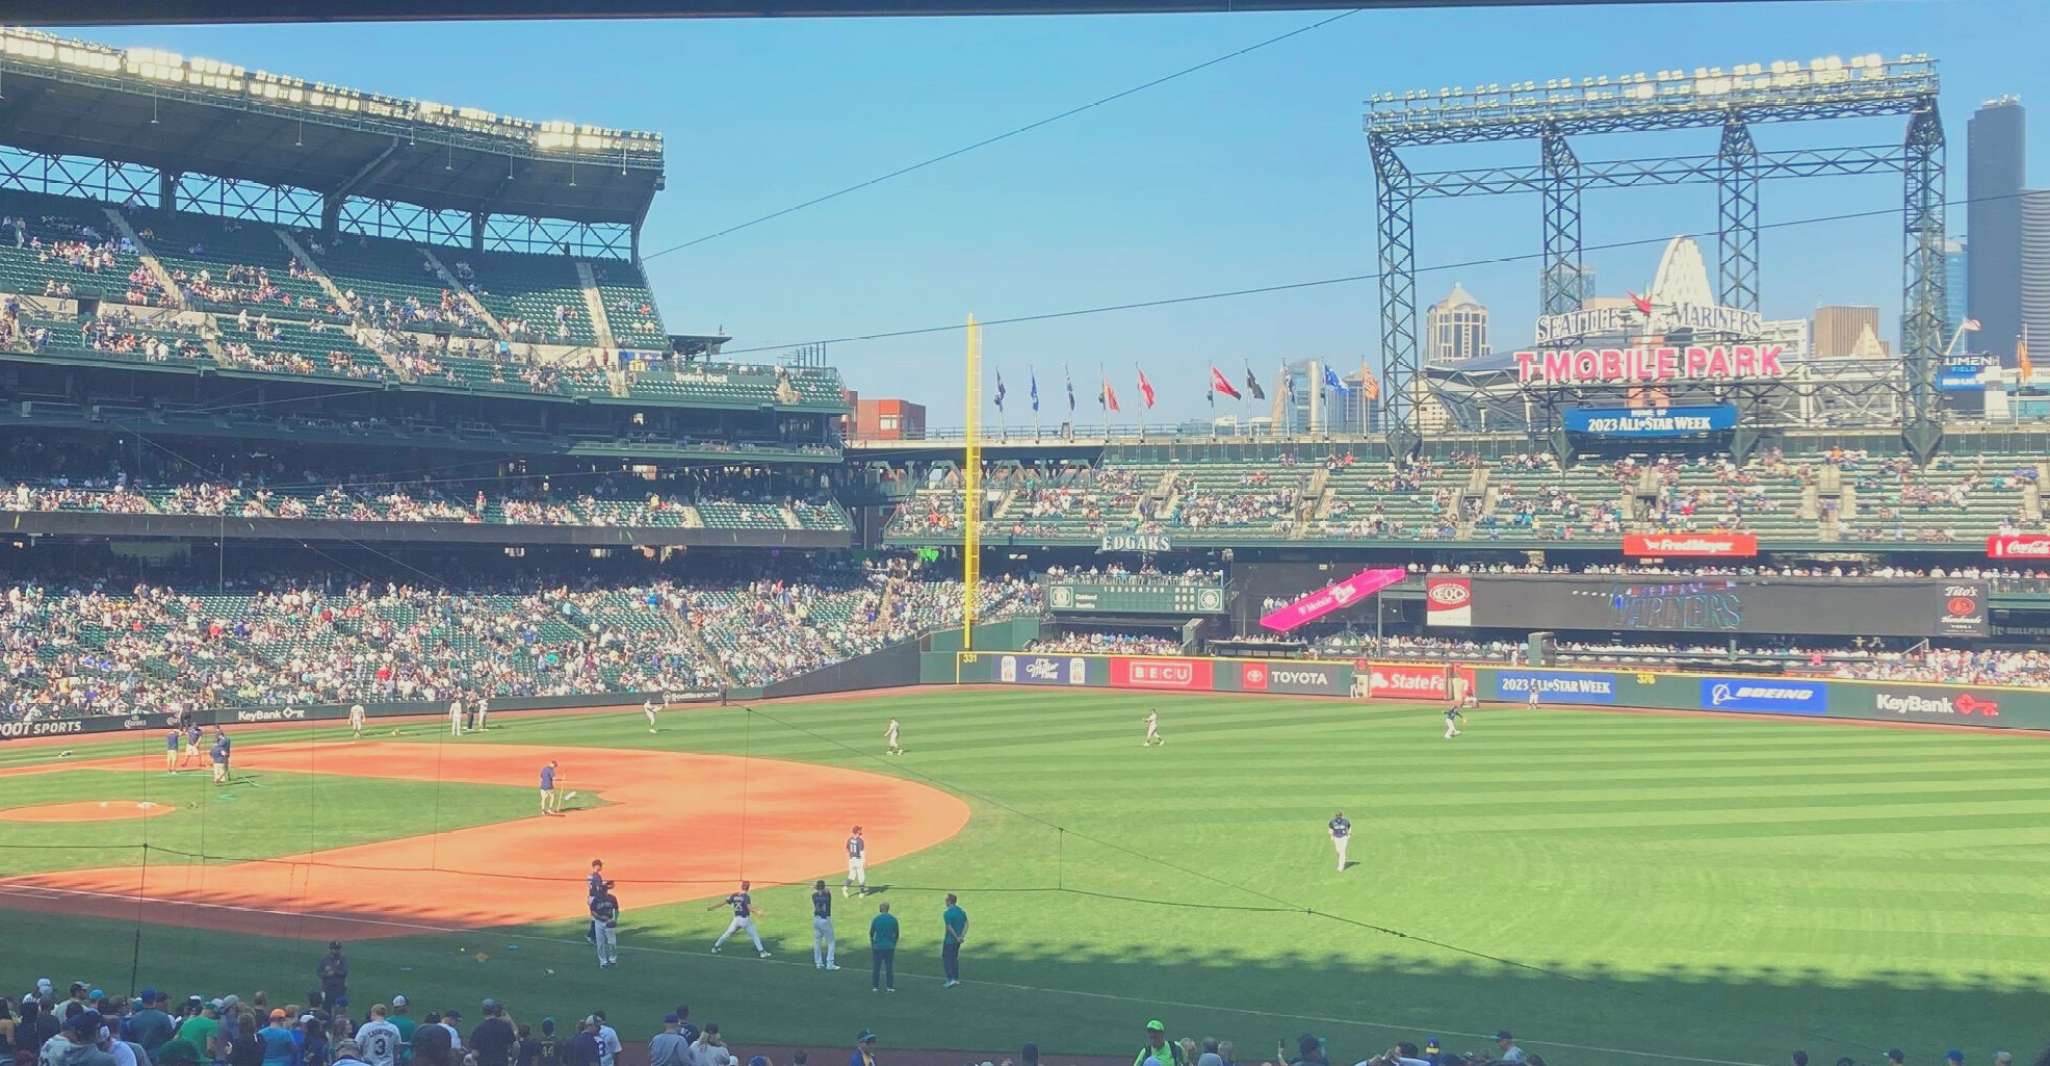 Seattle, Seattle Mariners Baseball Game at T-Mobile Park - Housity